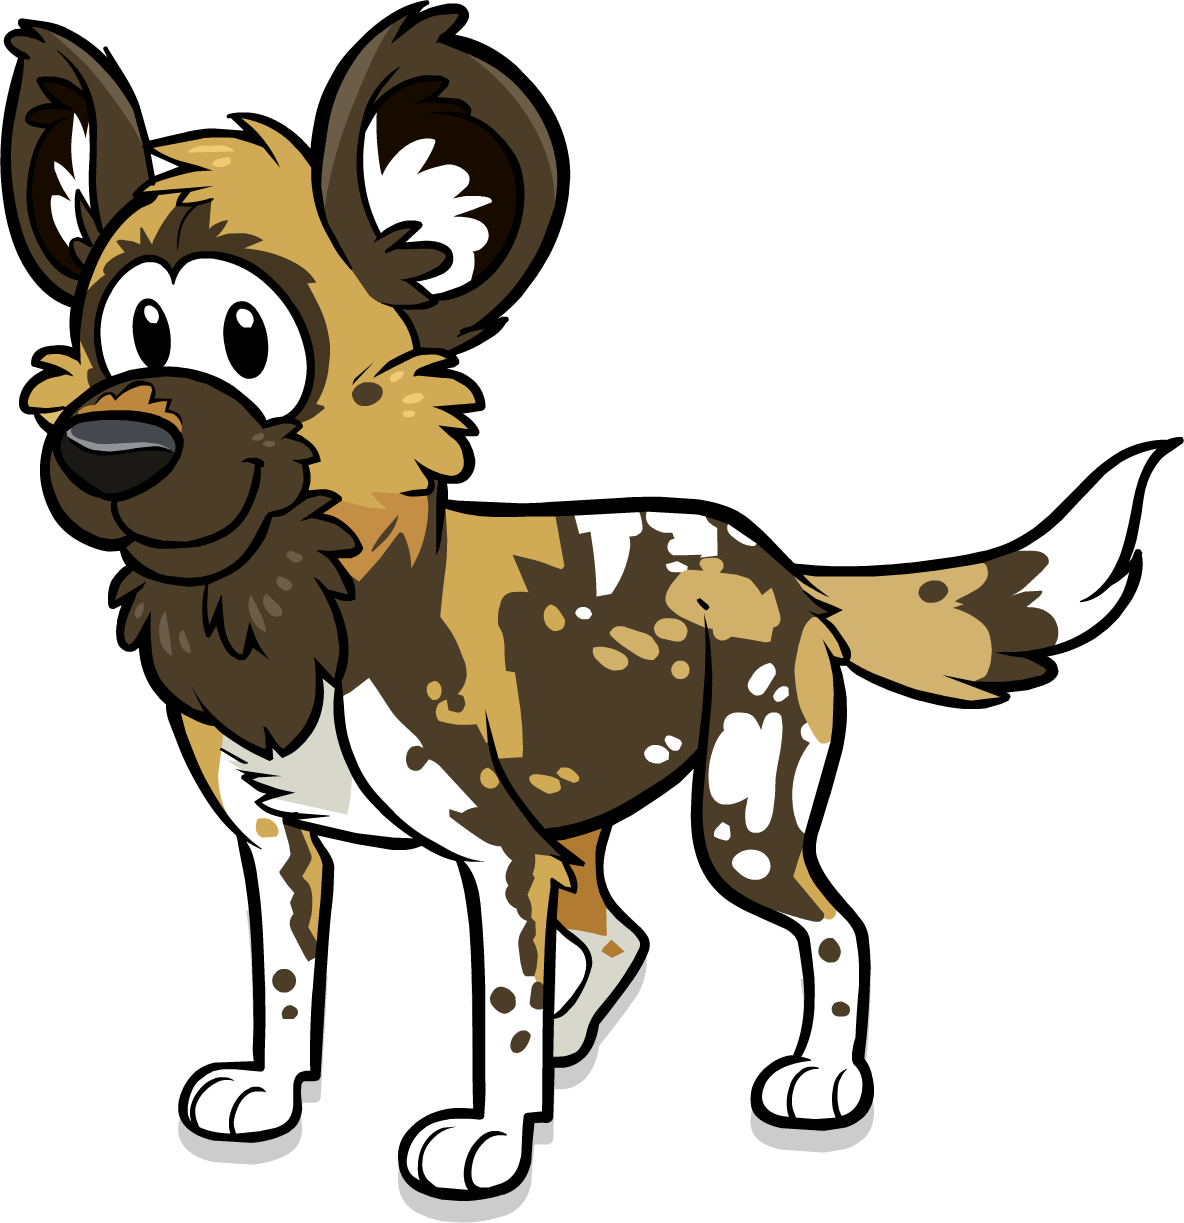 African painted club penguin. Painting clipart dog painting